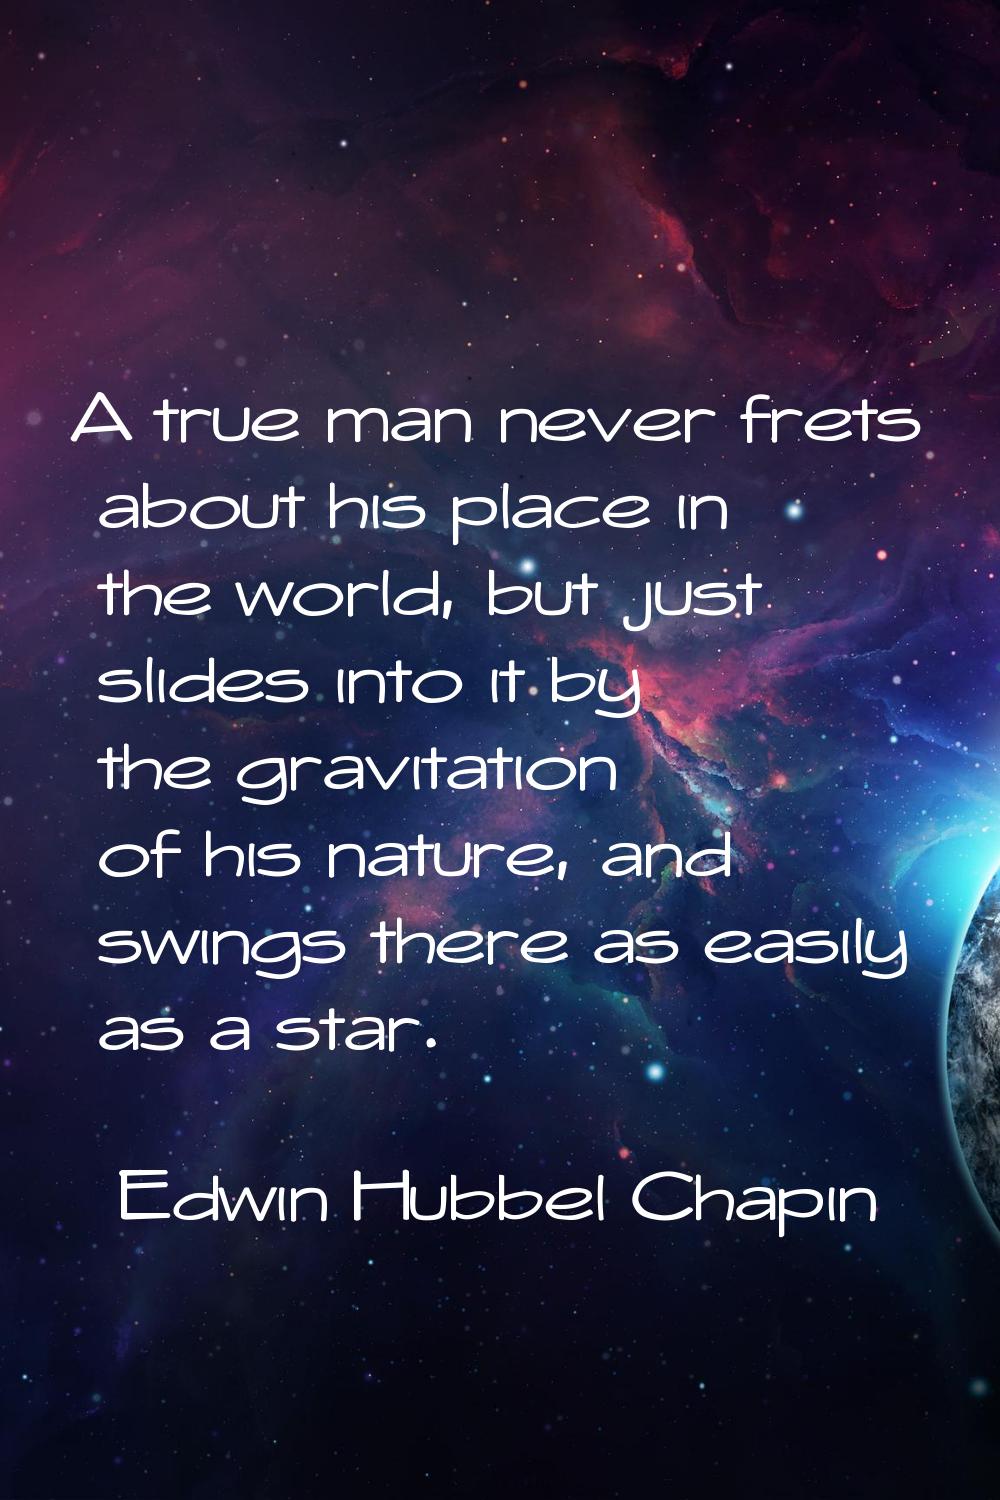 A true man never frets about his place in the world, but just slides into it by the gravitation of 